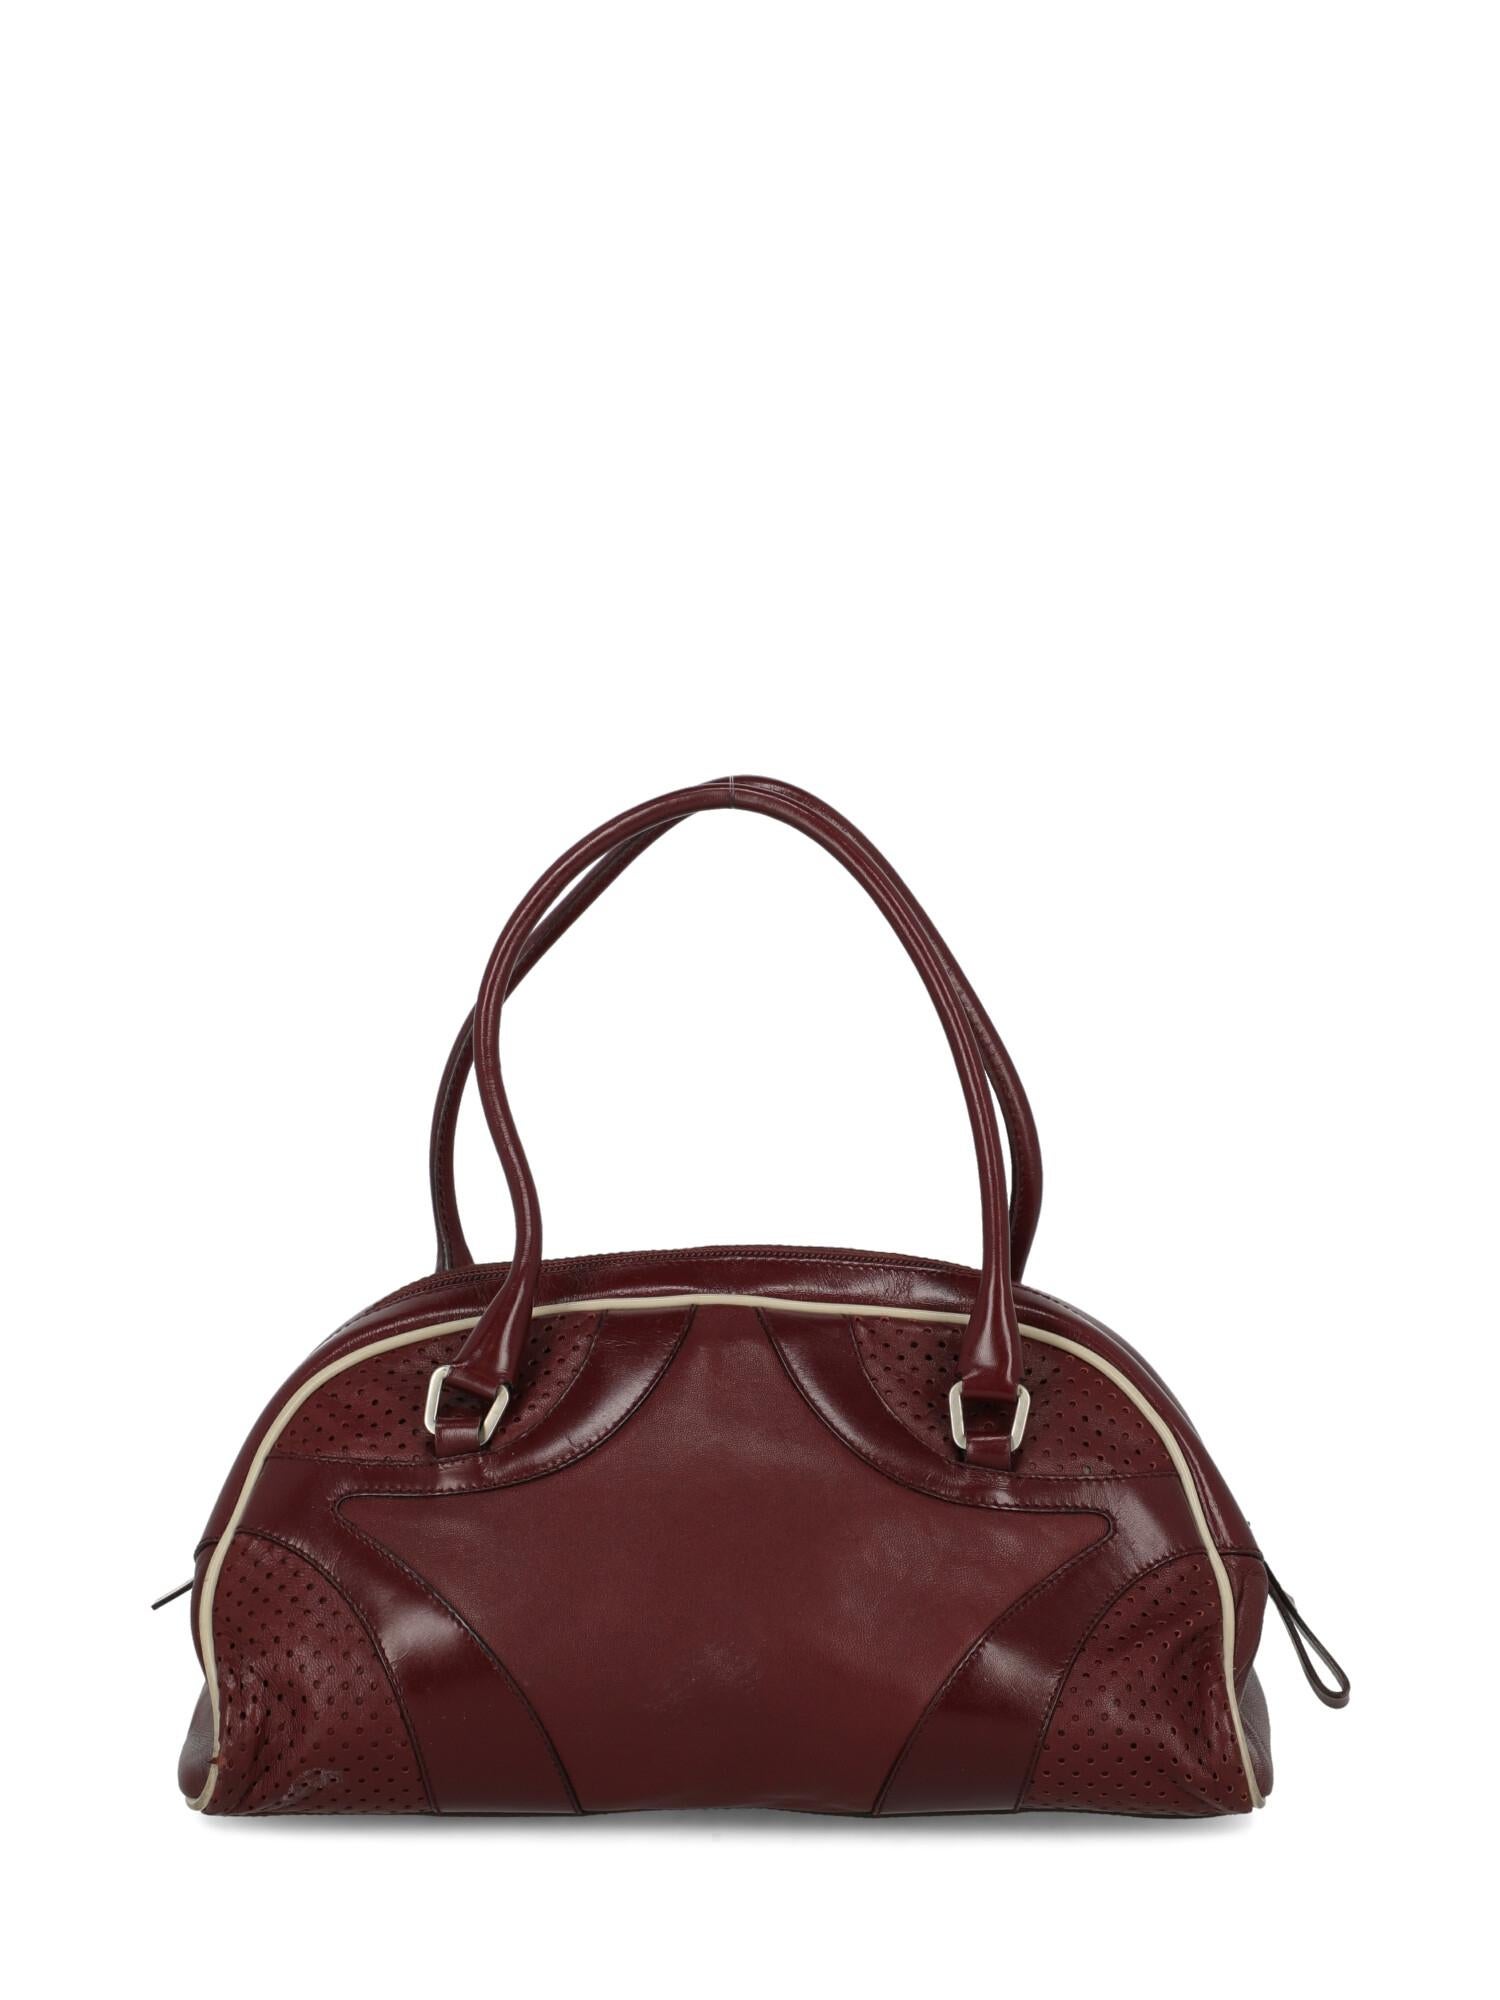 Prada Woman Shoulder bag Burgundy Leather In Fair Condition For Sale In Milan, IT